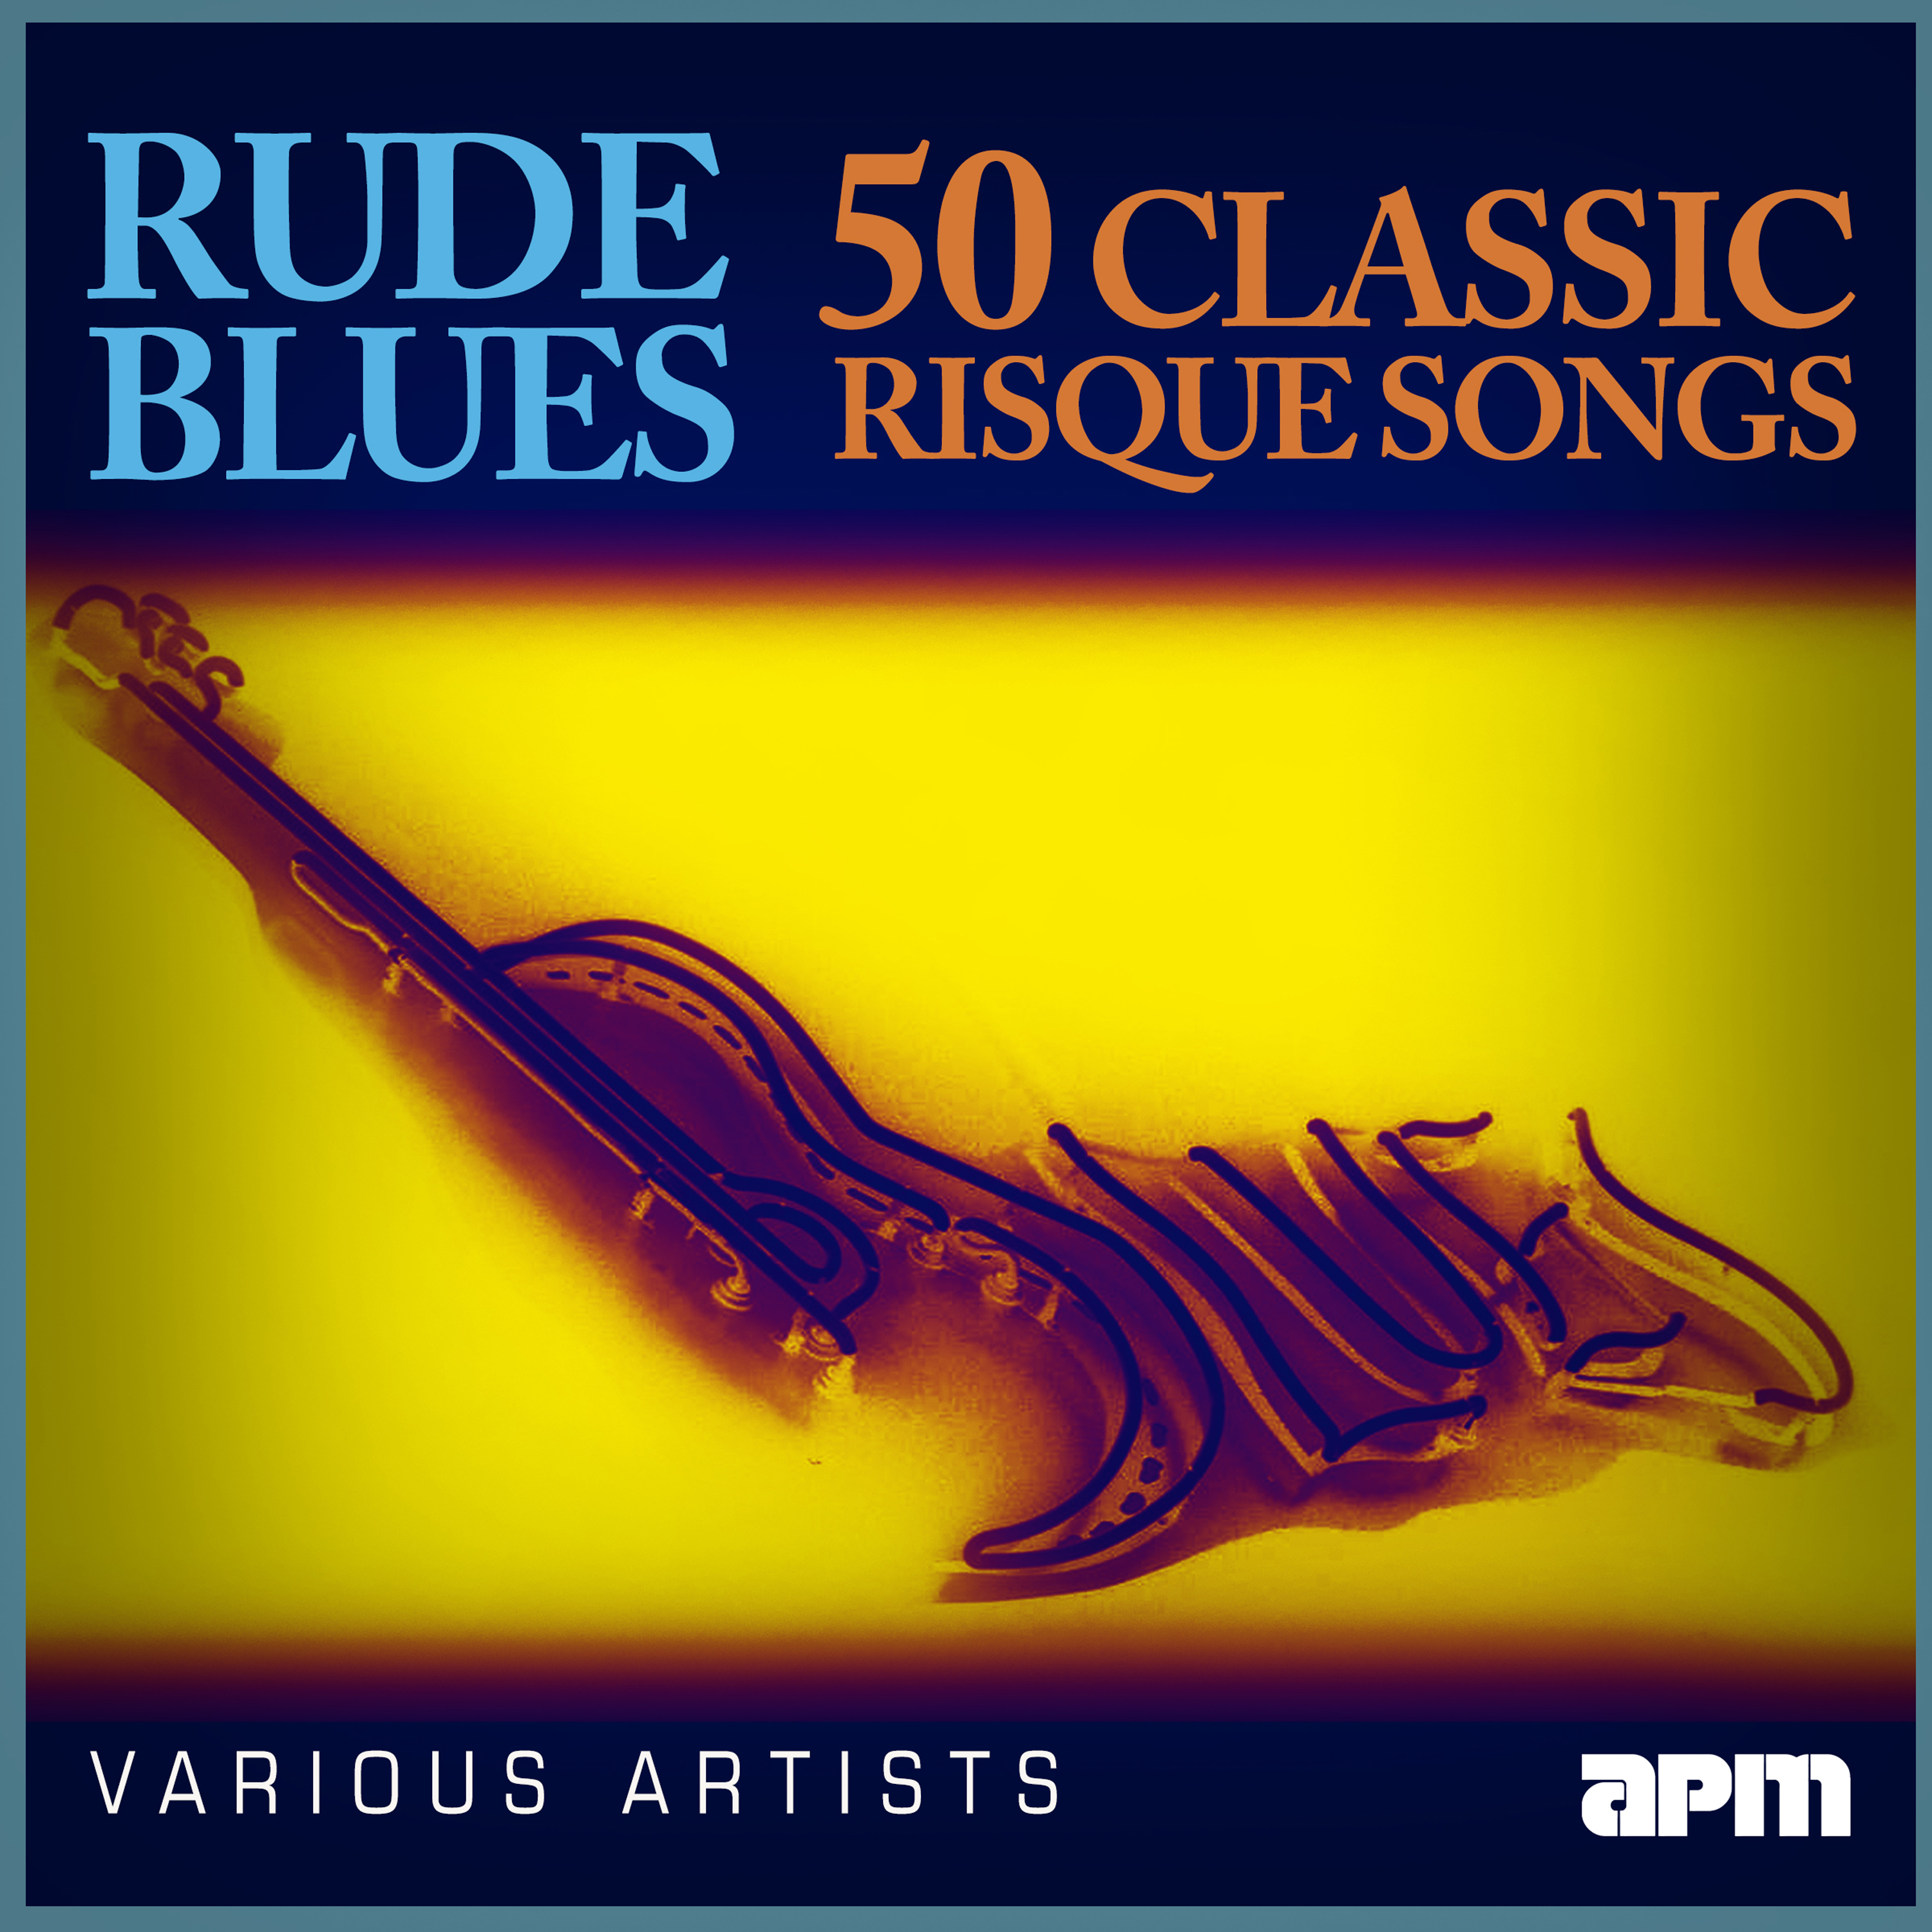 Rude Blues - 50 Classic Risque Songs